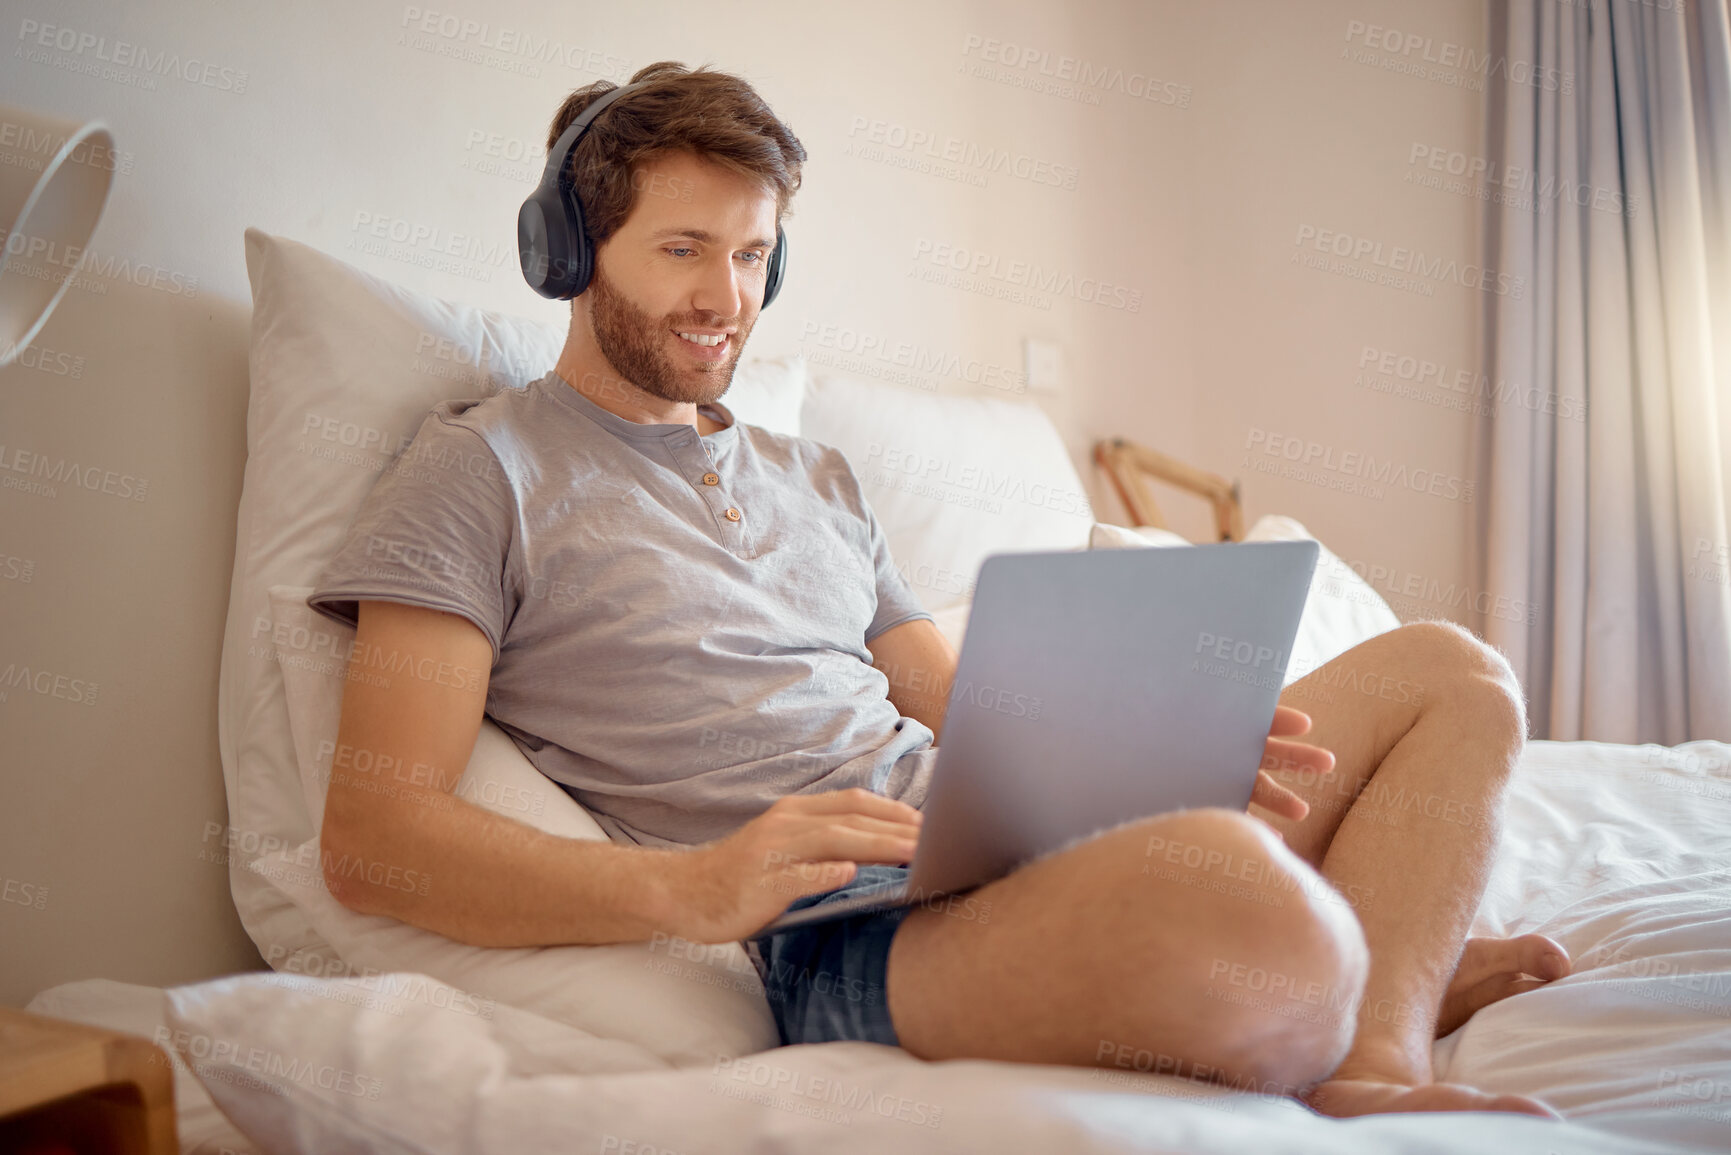 Buy stock photo Relax man streaming on a laptop while listening on headphones and sitting on a bed at home. Casual male enjoying free time on weekend, watching a movie or series. Guy indoors, enjoying subscription